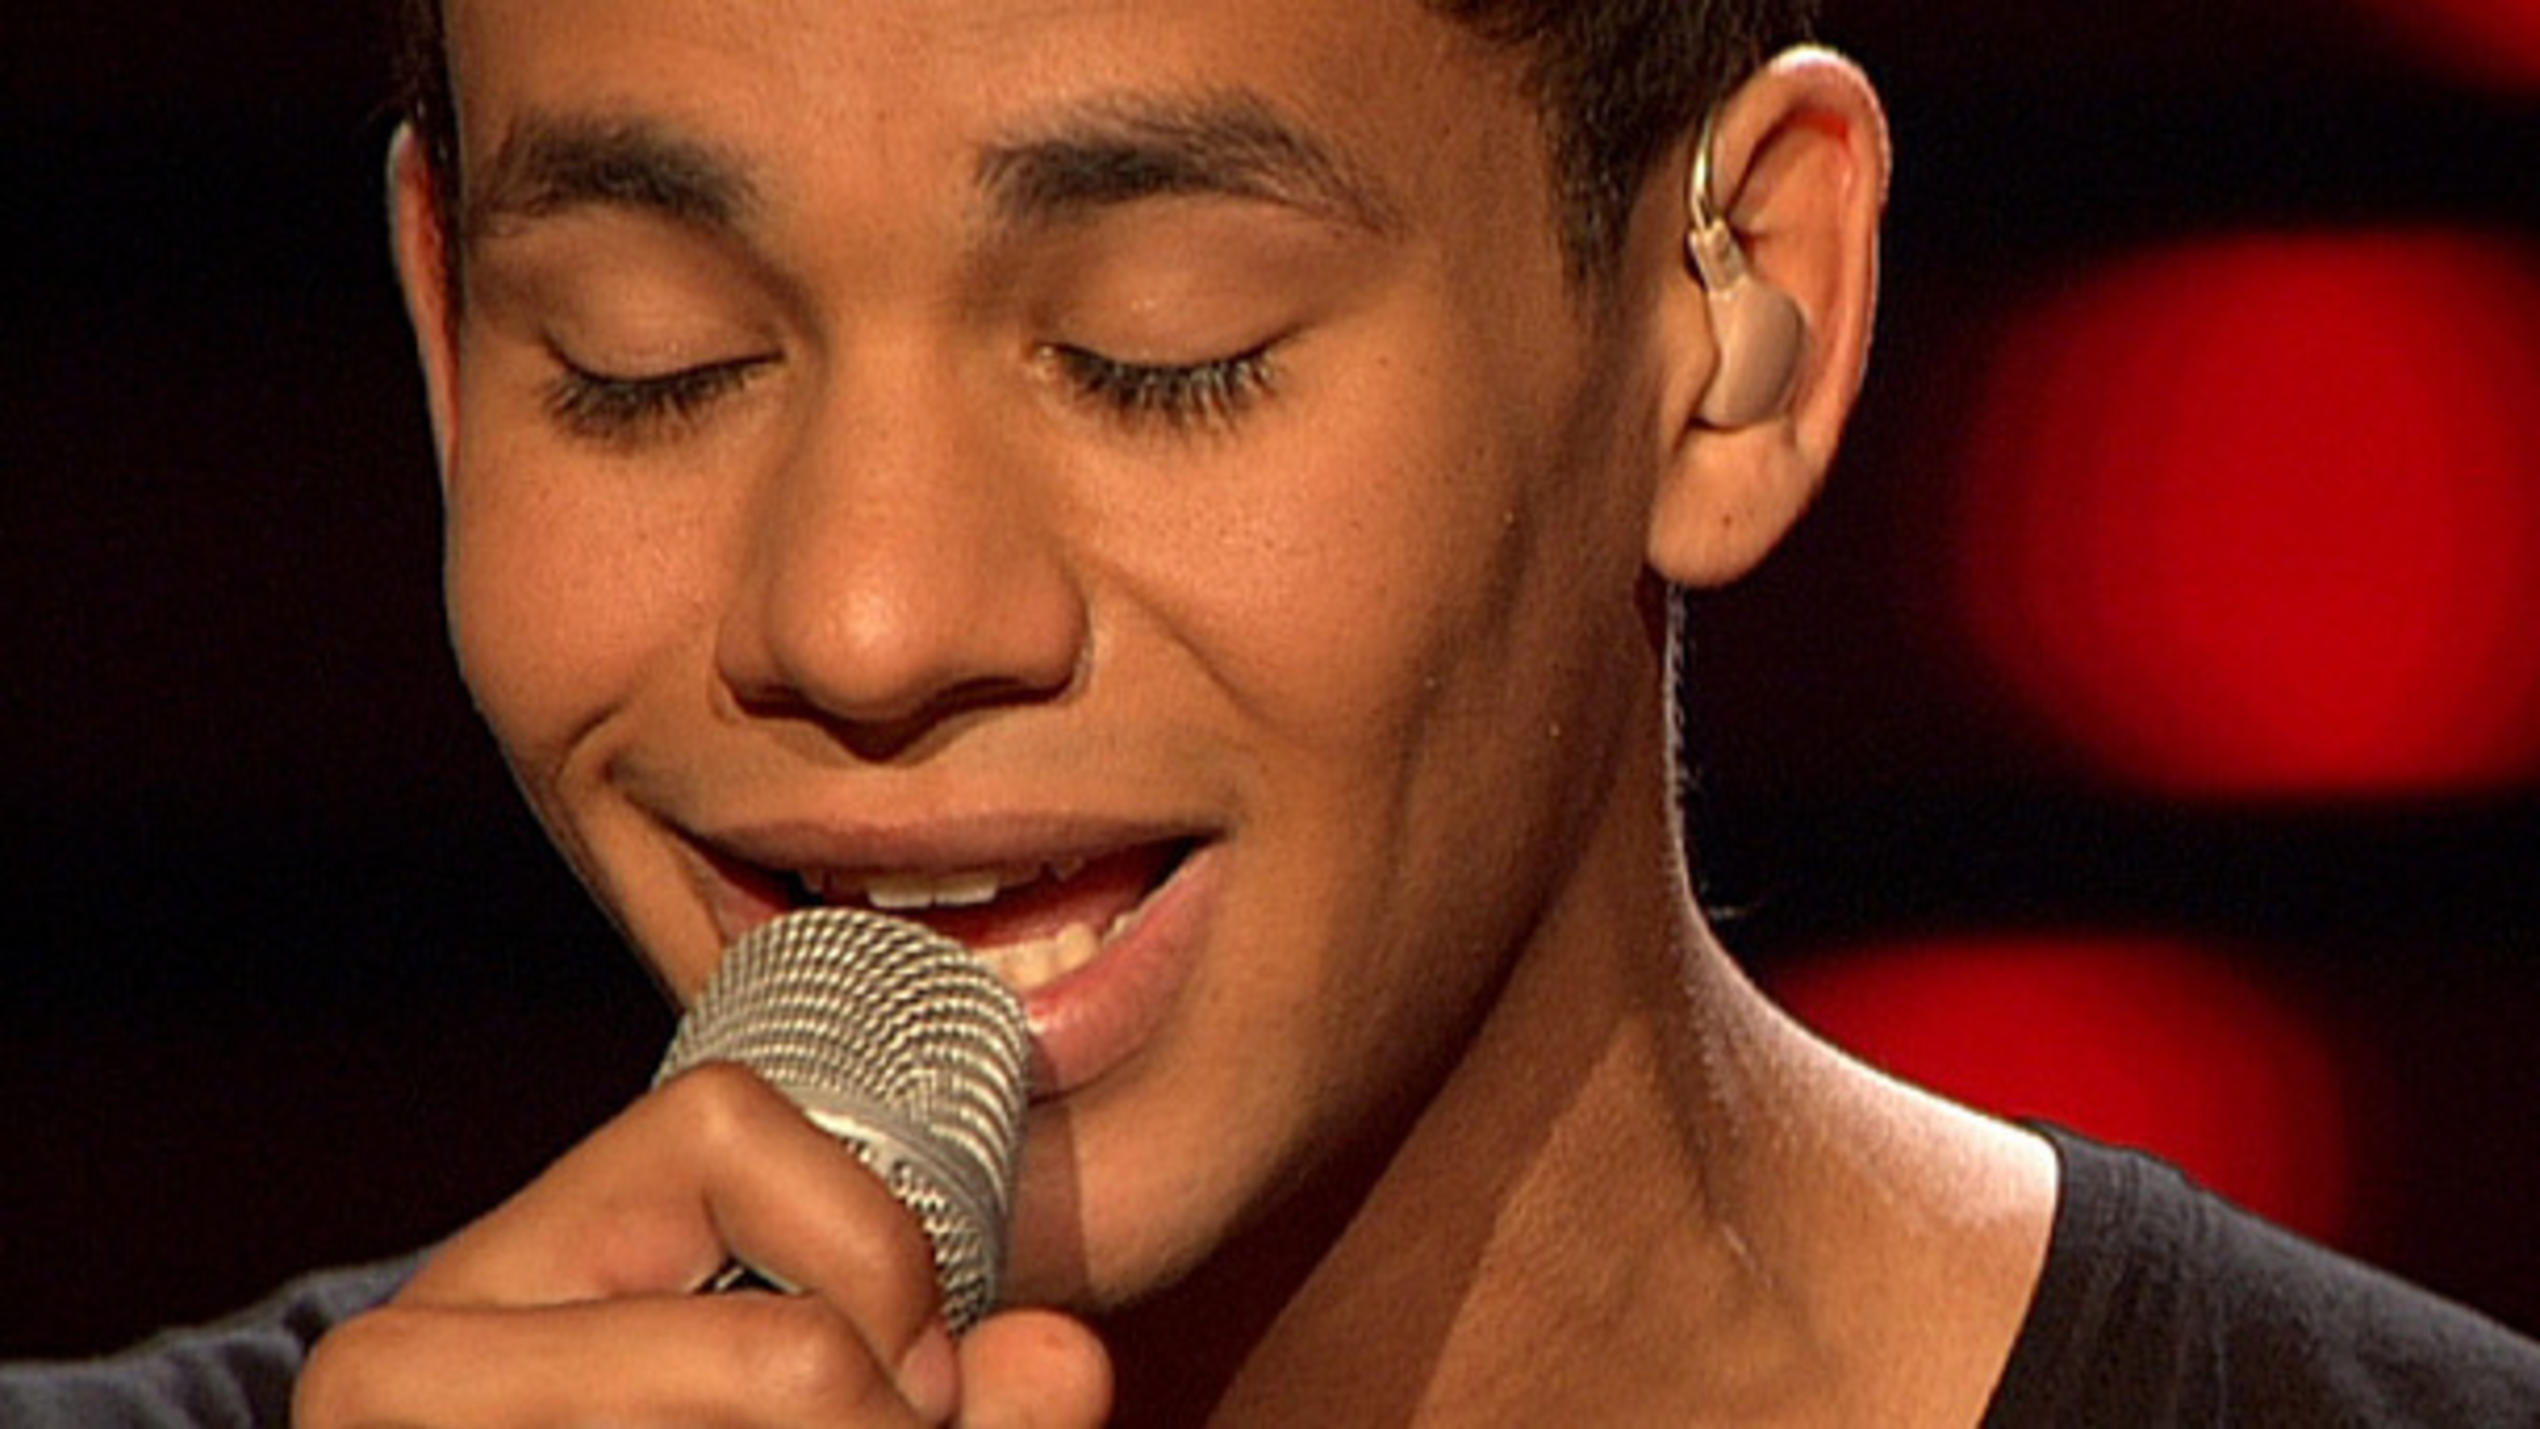 Das Gesangsduell: Kassim Auale singt "Hey There Delilah"